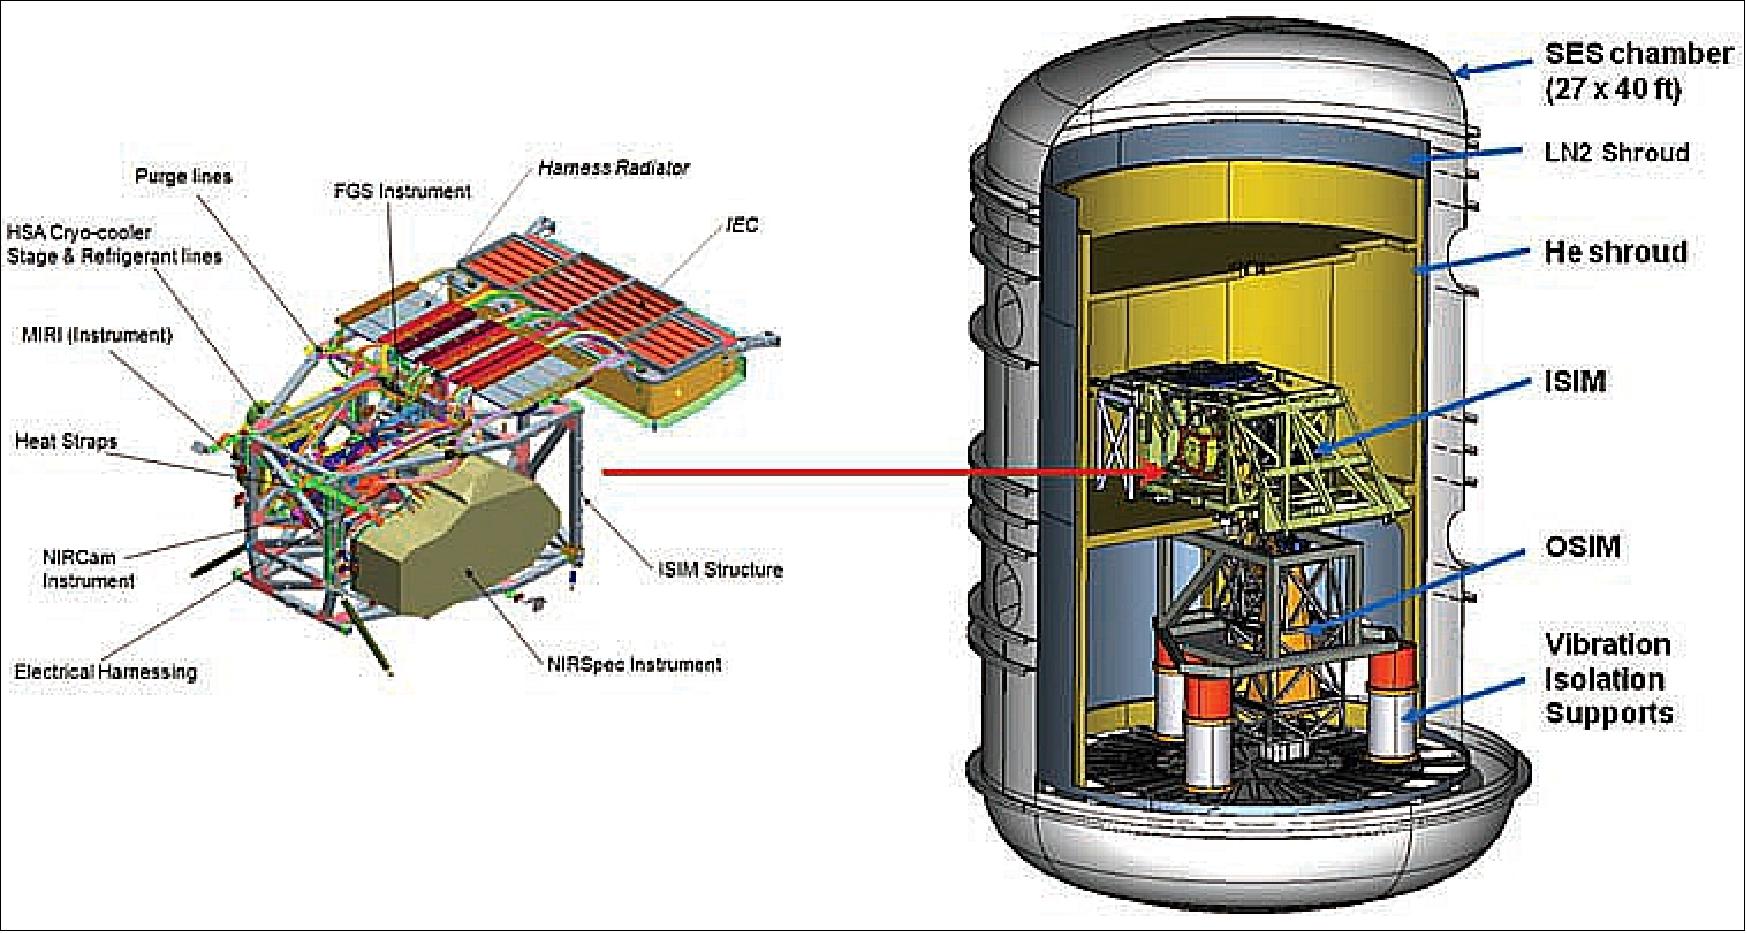 Figure 55: The cryogenic portion of the ISIM system (left) is shown in its test configuration (right) for the CV-1RR (image credit: NASA)